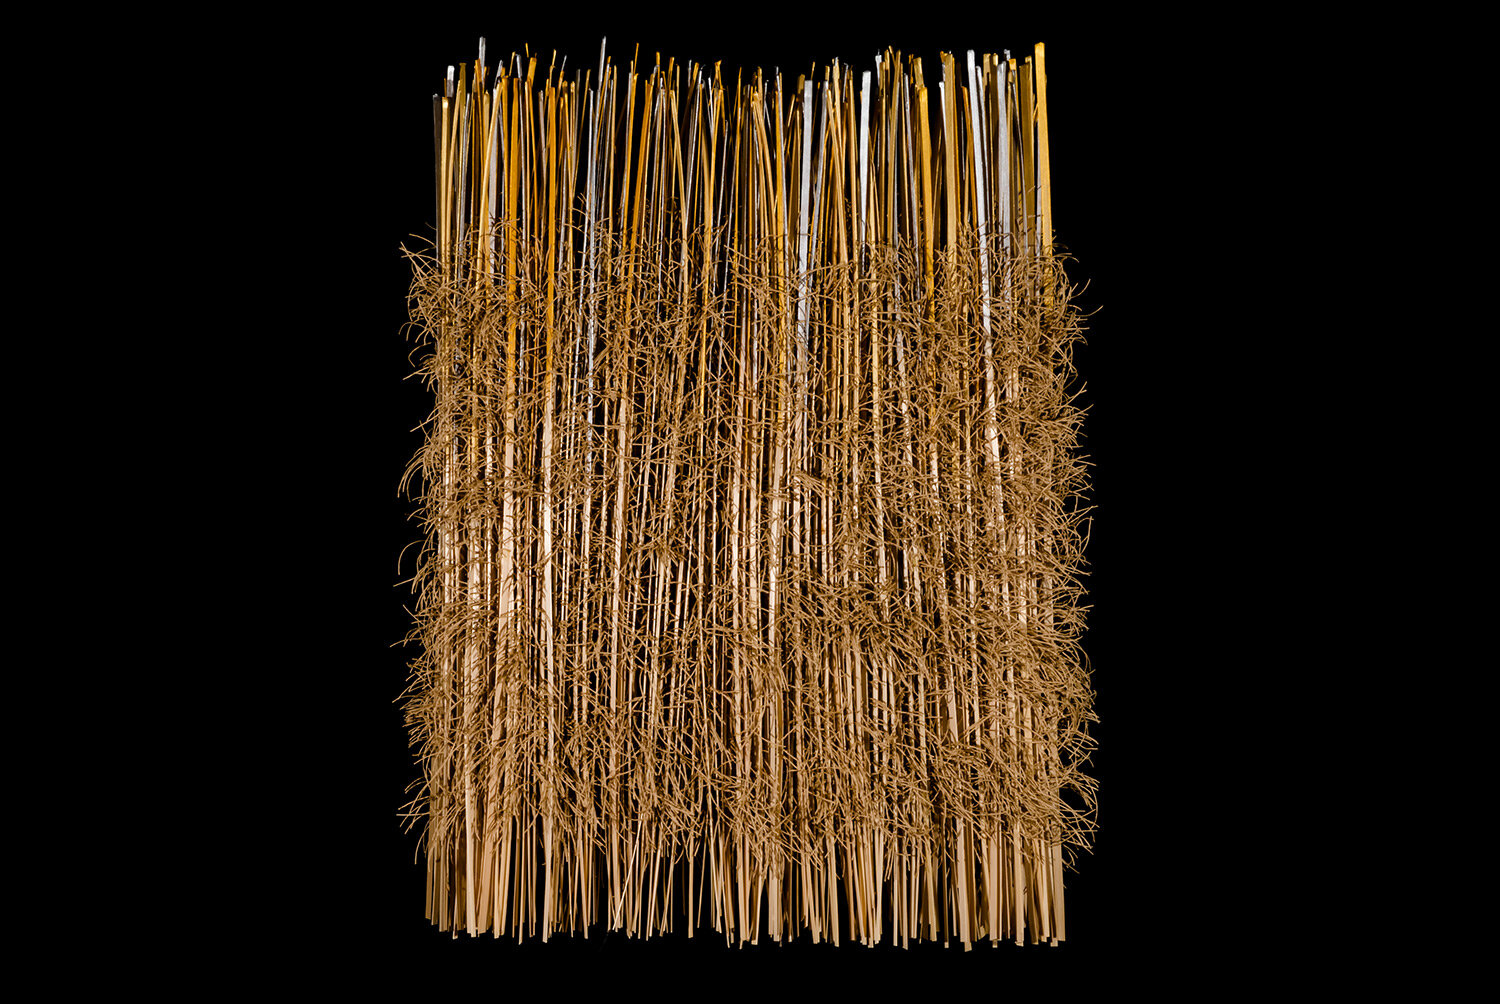 Late Grasses / 27"x22"x2" / woven, knotted / hemp, linen, paper twine, bamboo, acrylic paint / 2010